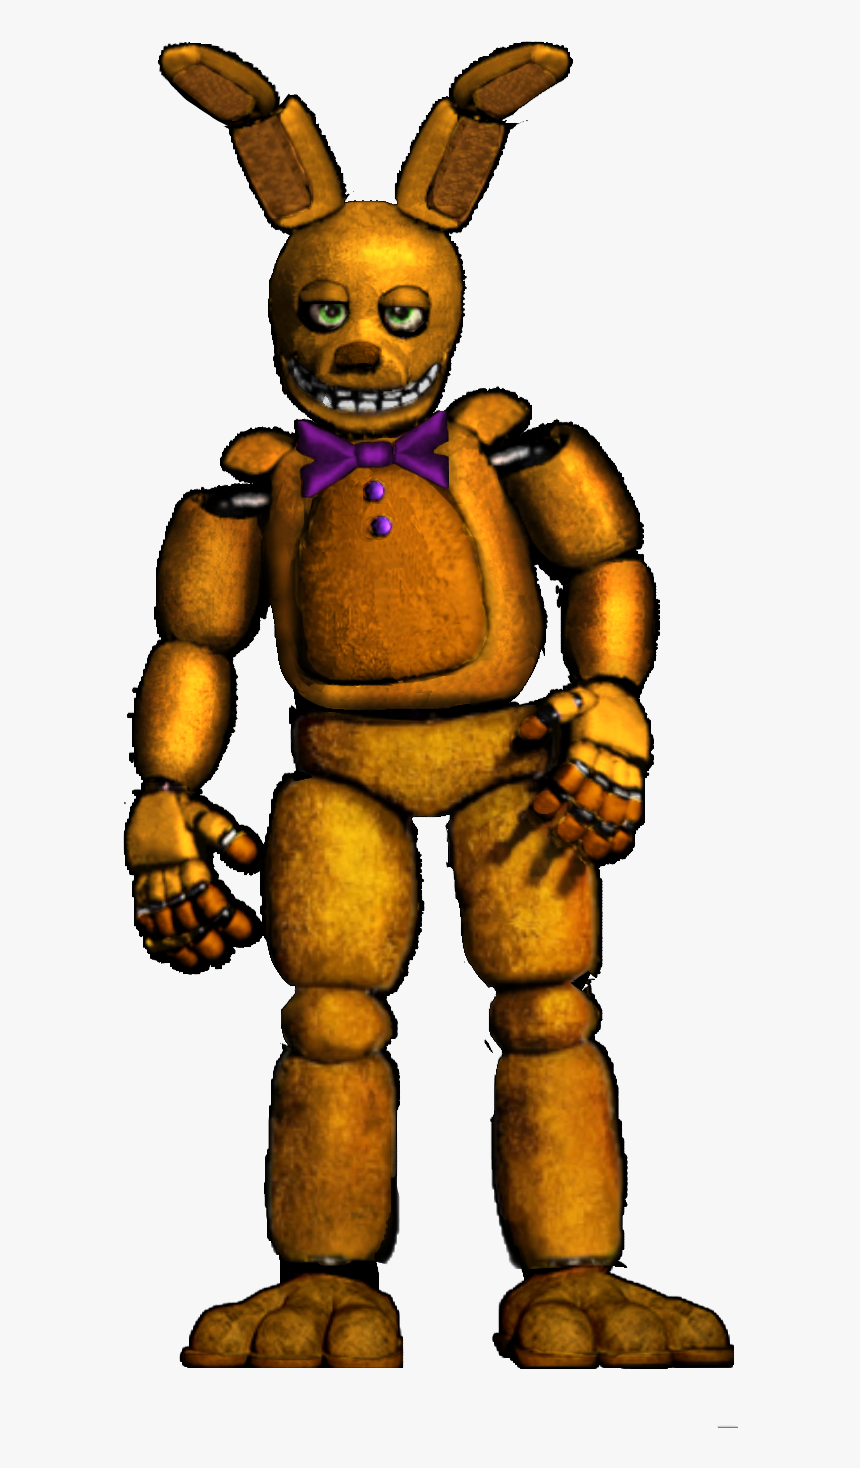 Fixed Springtrap / Springbonnie V - Фнаф Спринг Бонни, HD Png Download, Free Download